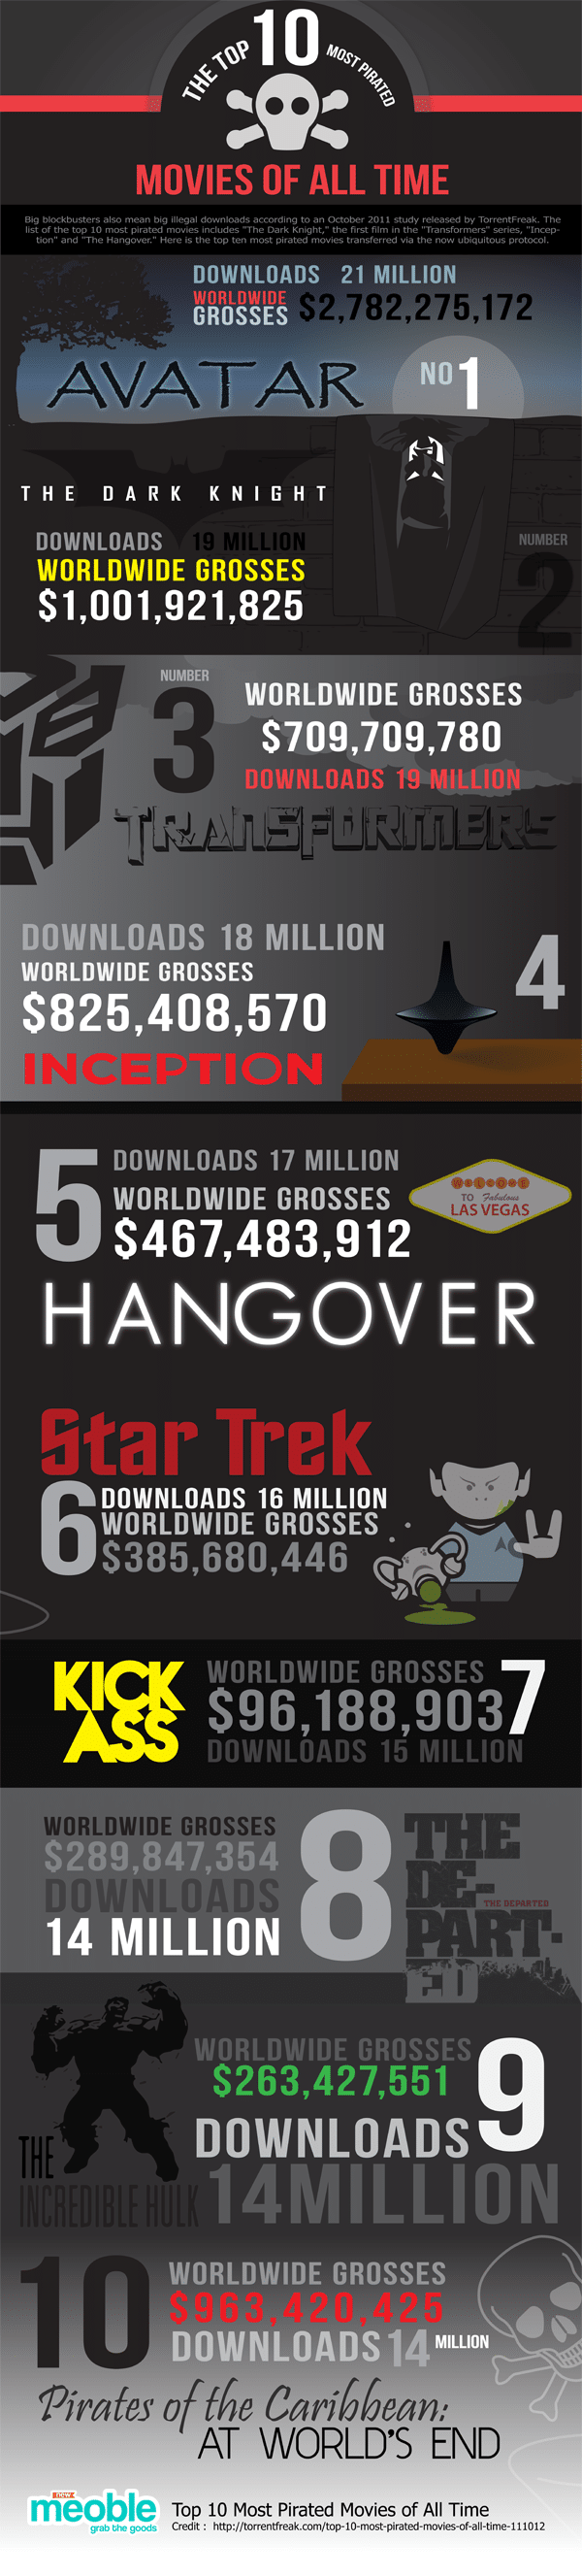 10 Most Pirated Movies Of All Time [Infographic]